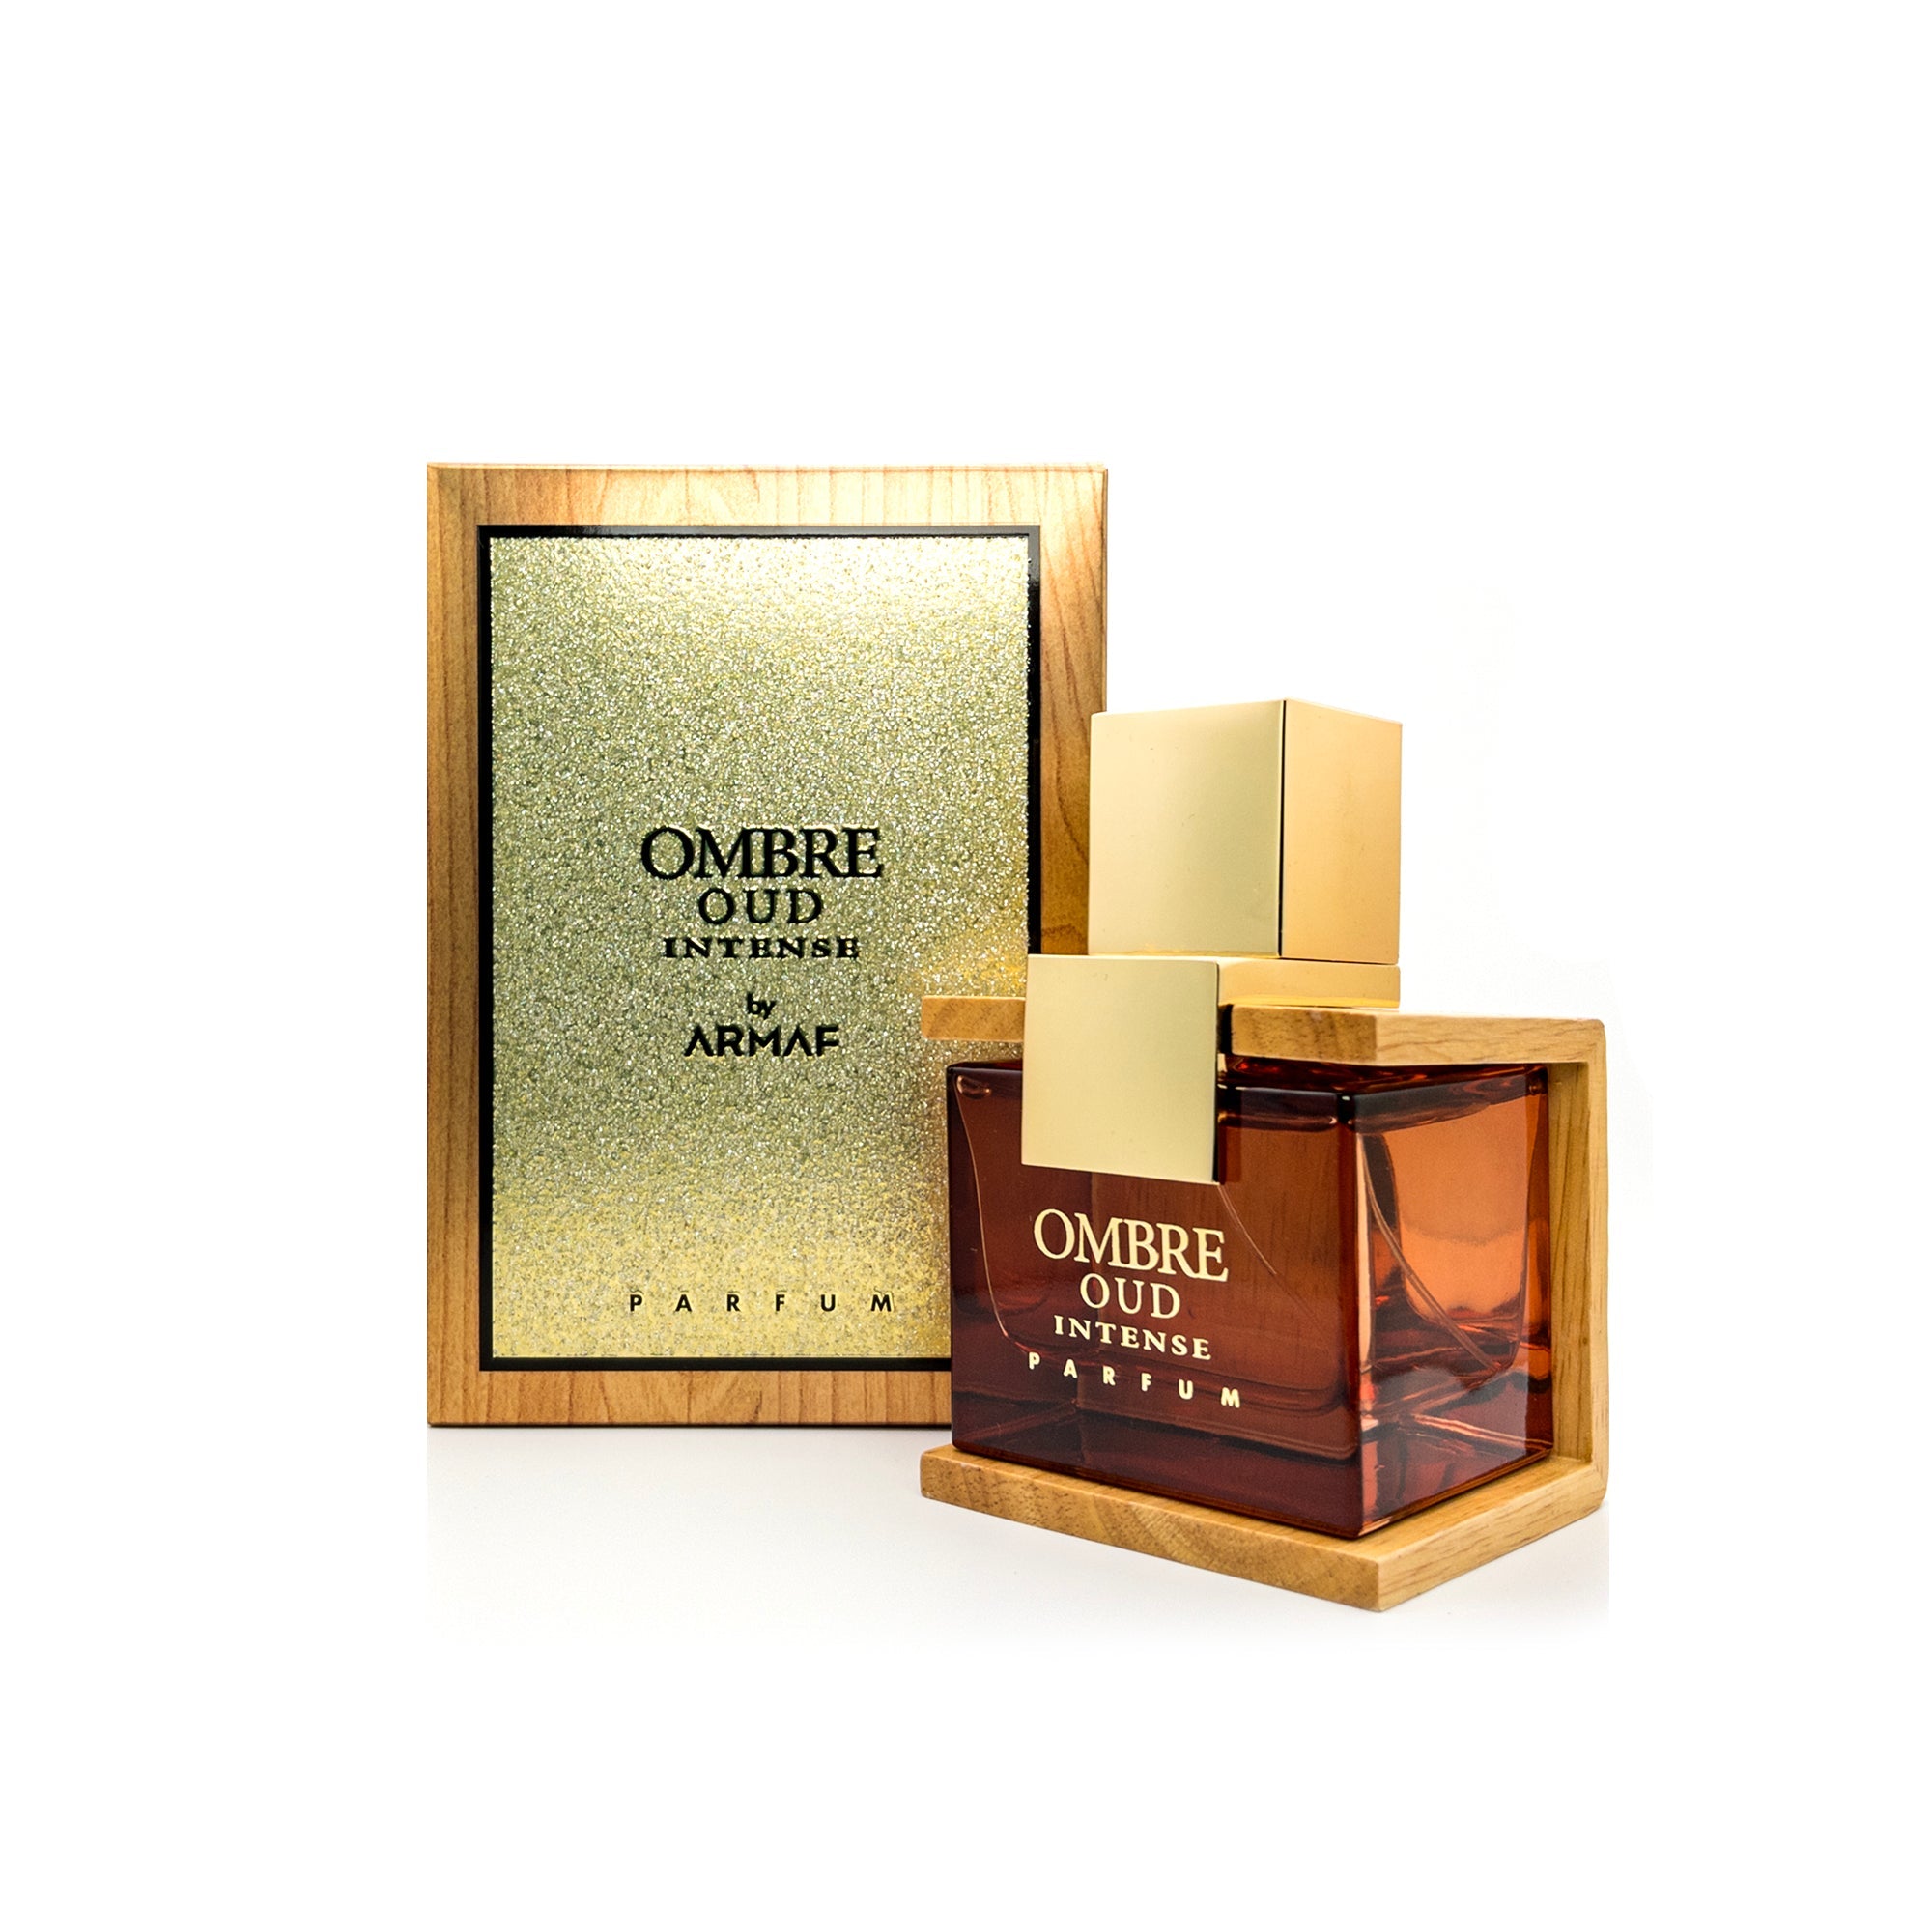 — Armaf Ombre Oud Intense Perfume